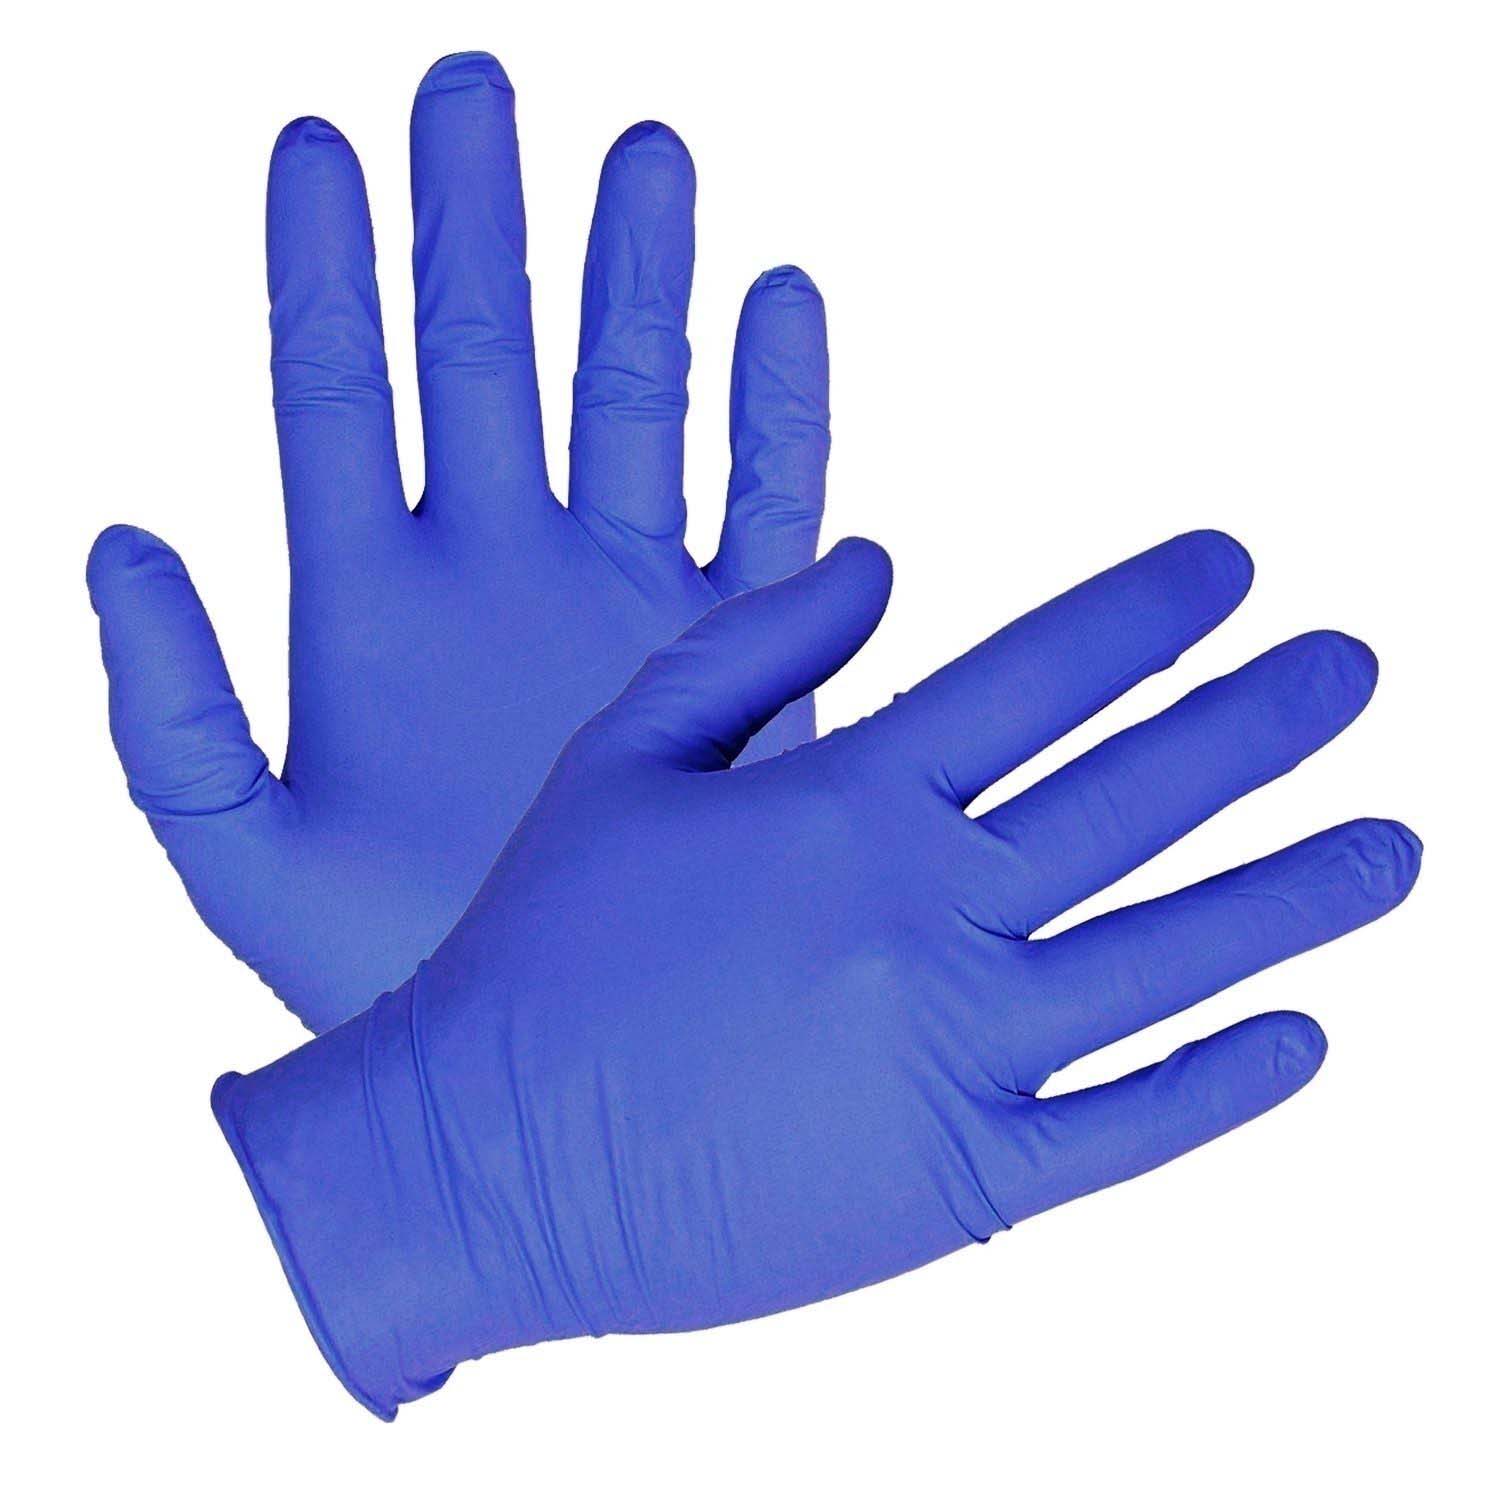 A pair of periwinkle Color Nitrile Gloves.